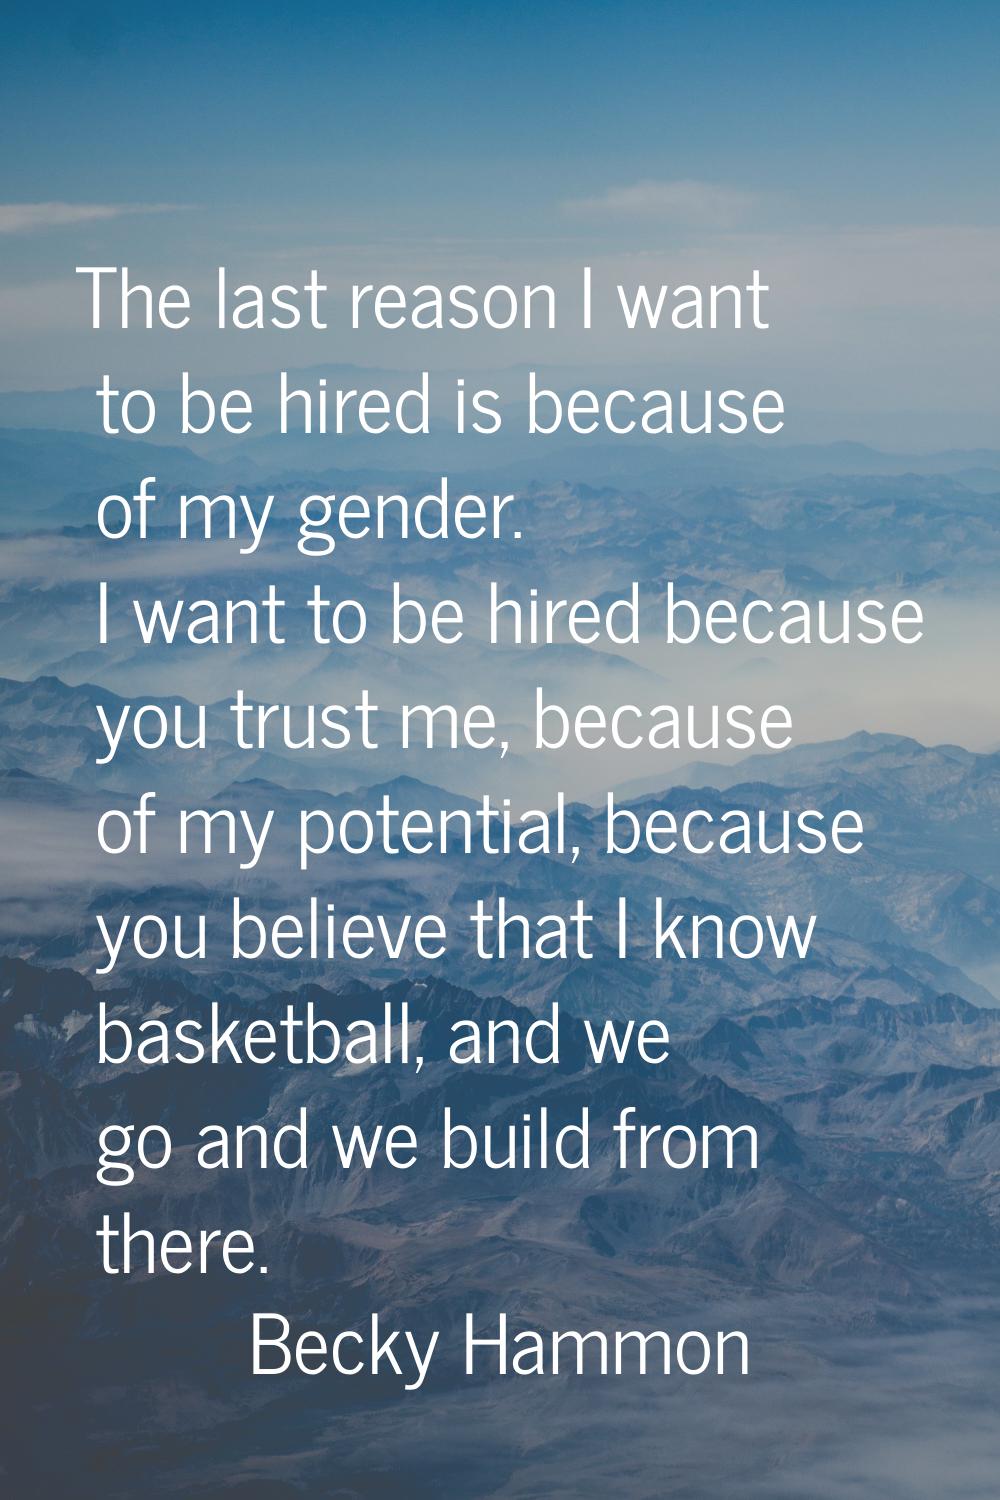 The last reason I want to be hired is because of my gender. I want to be hired because you trust me